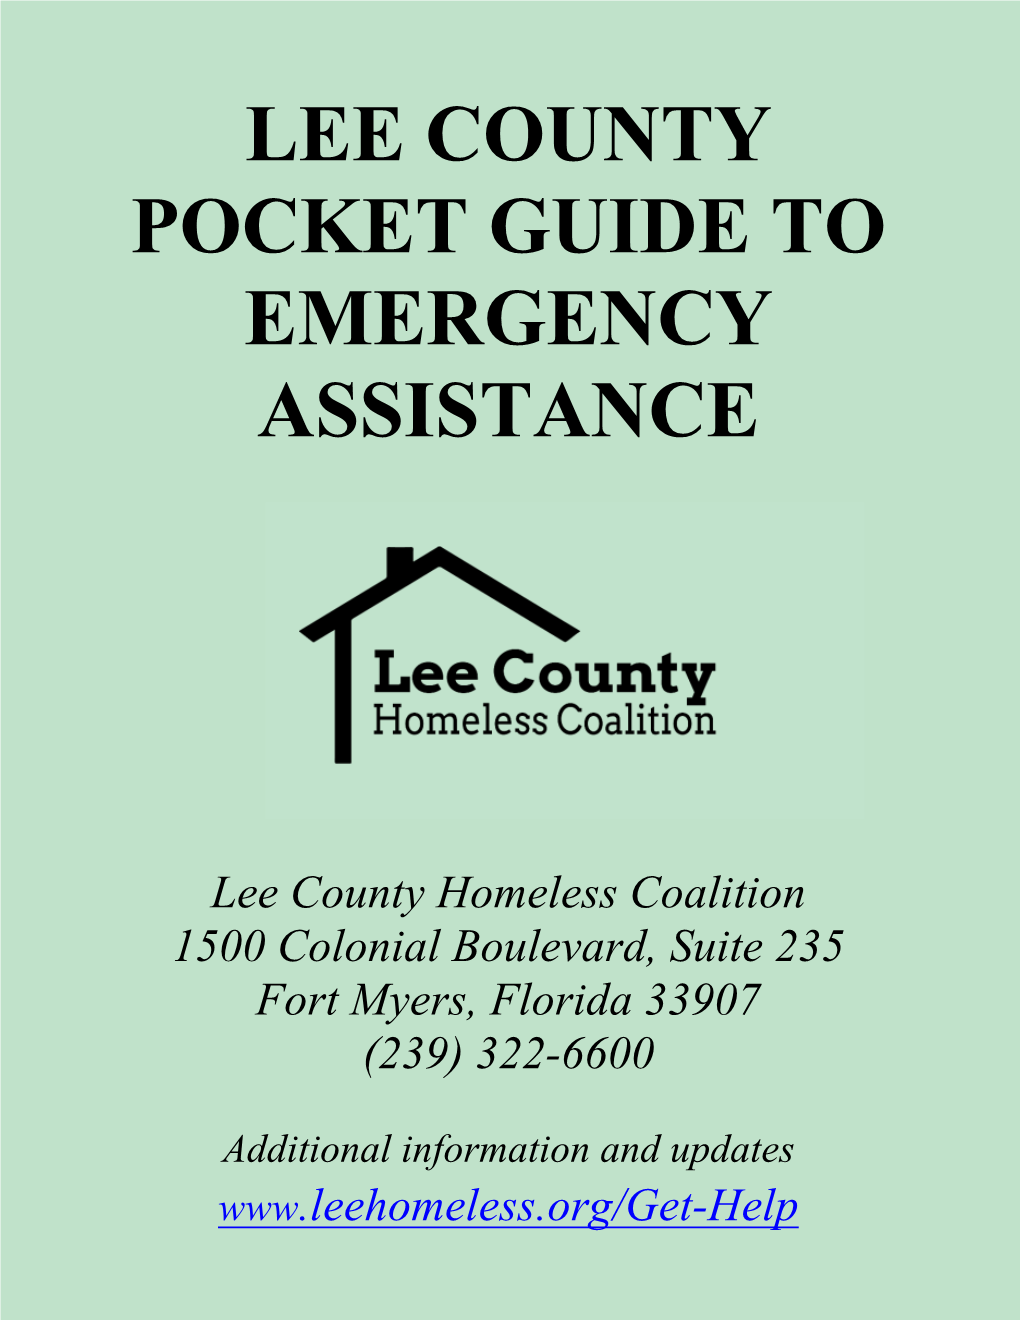 Lee County Pocket Guide to Emergency Assistance